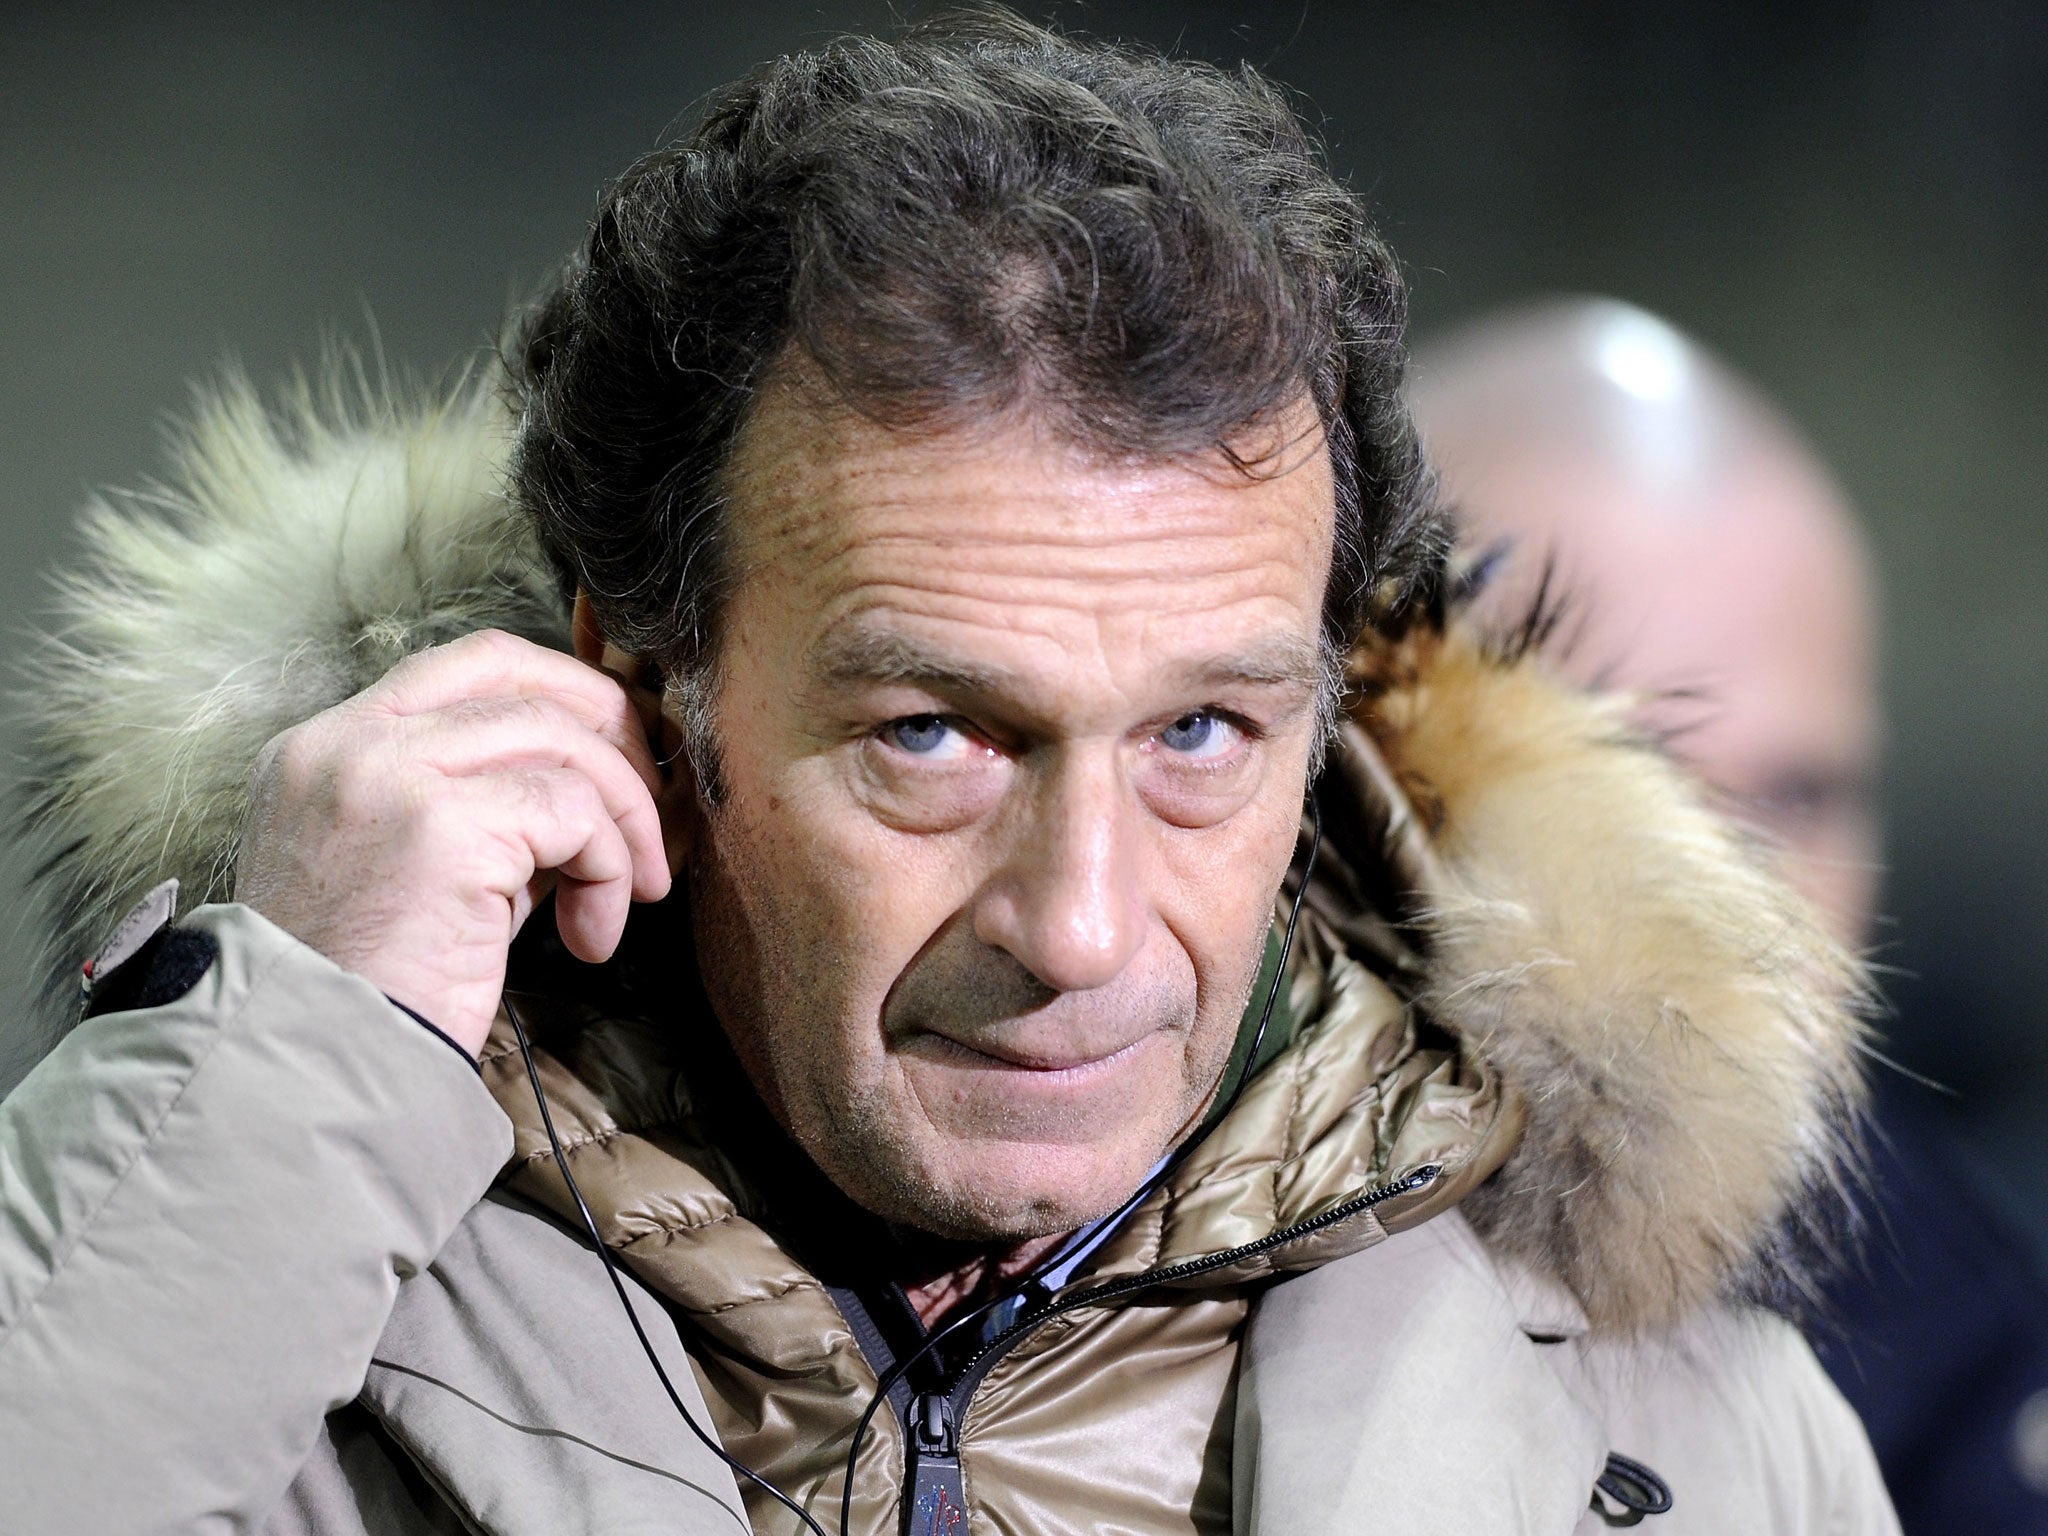 Cagliari President Massimo Cellino has been arrested as part of an investigation into the Is Arenas stadium where the Serie A club has been staging their home matches this season